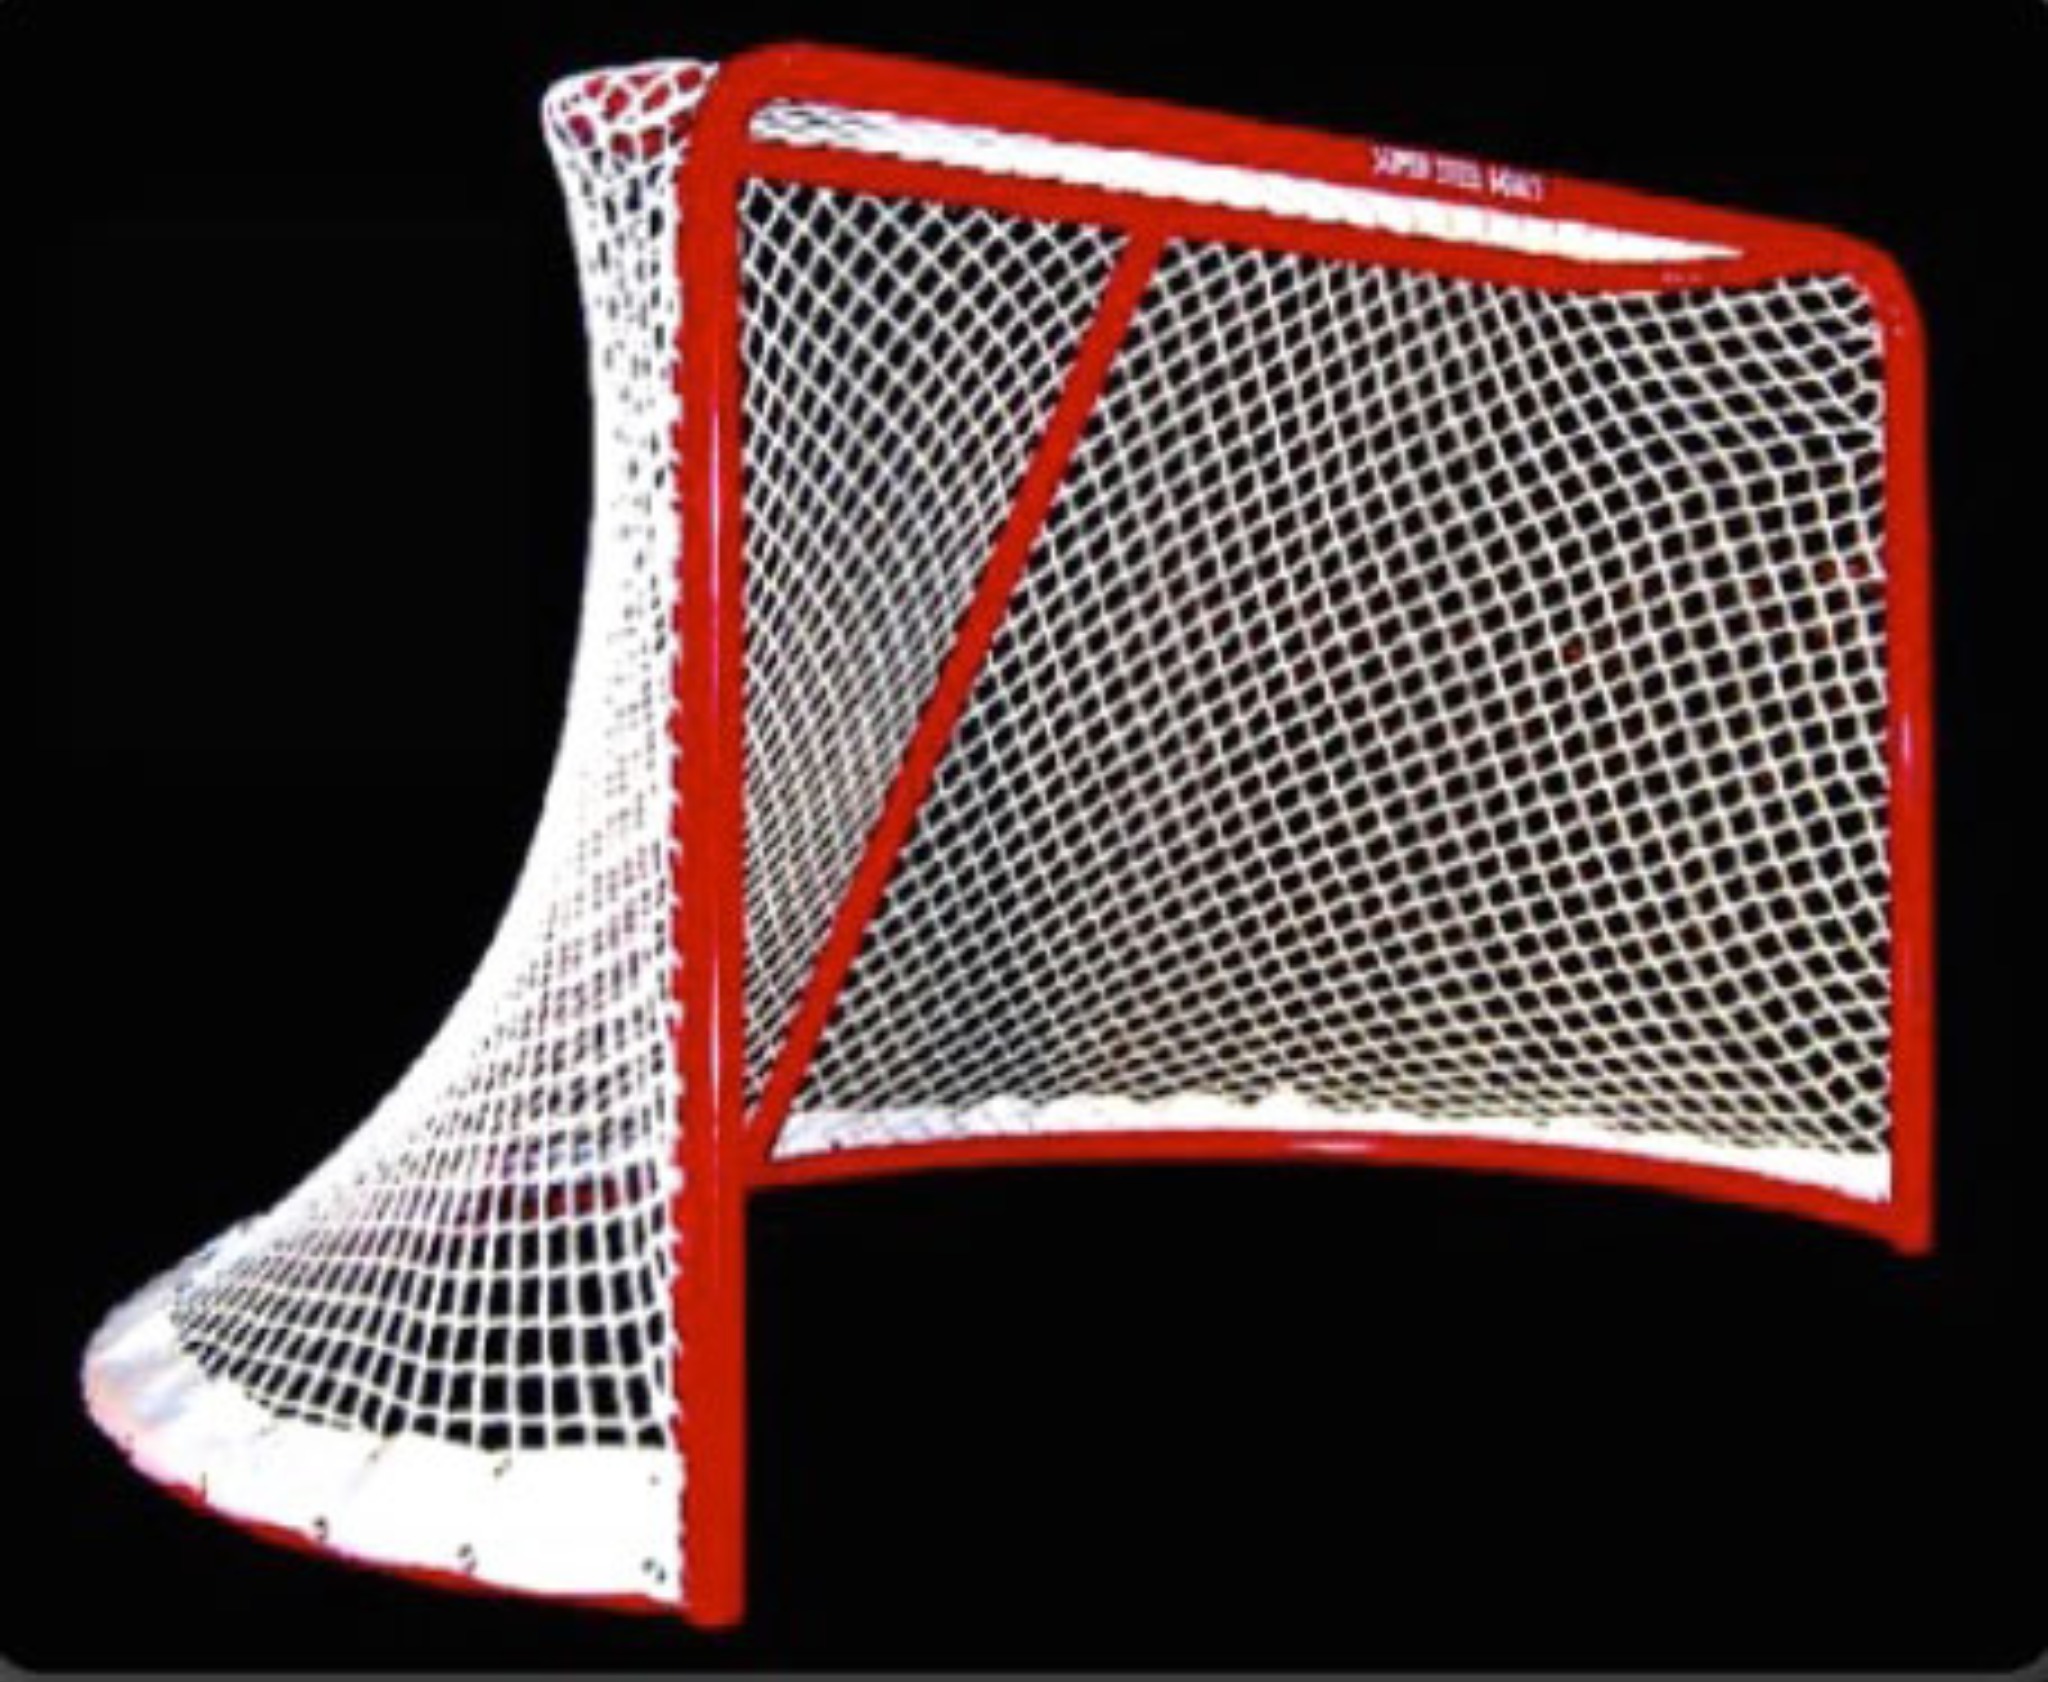 Full Size Steel Hockey Goals, Made in the USA, with Welded Lacing Bar for Attaching Net.